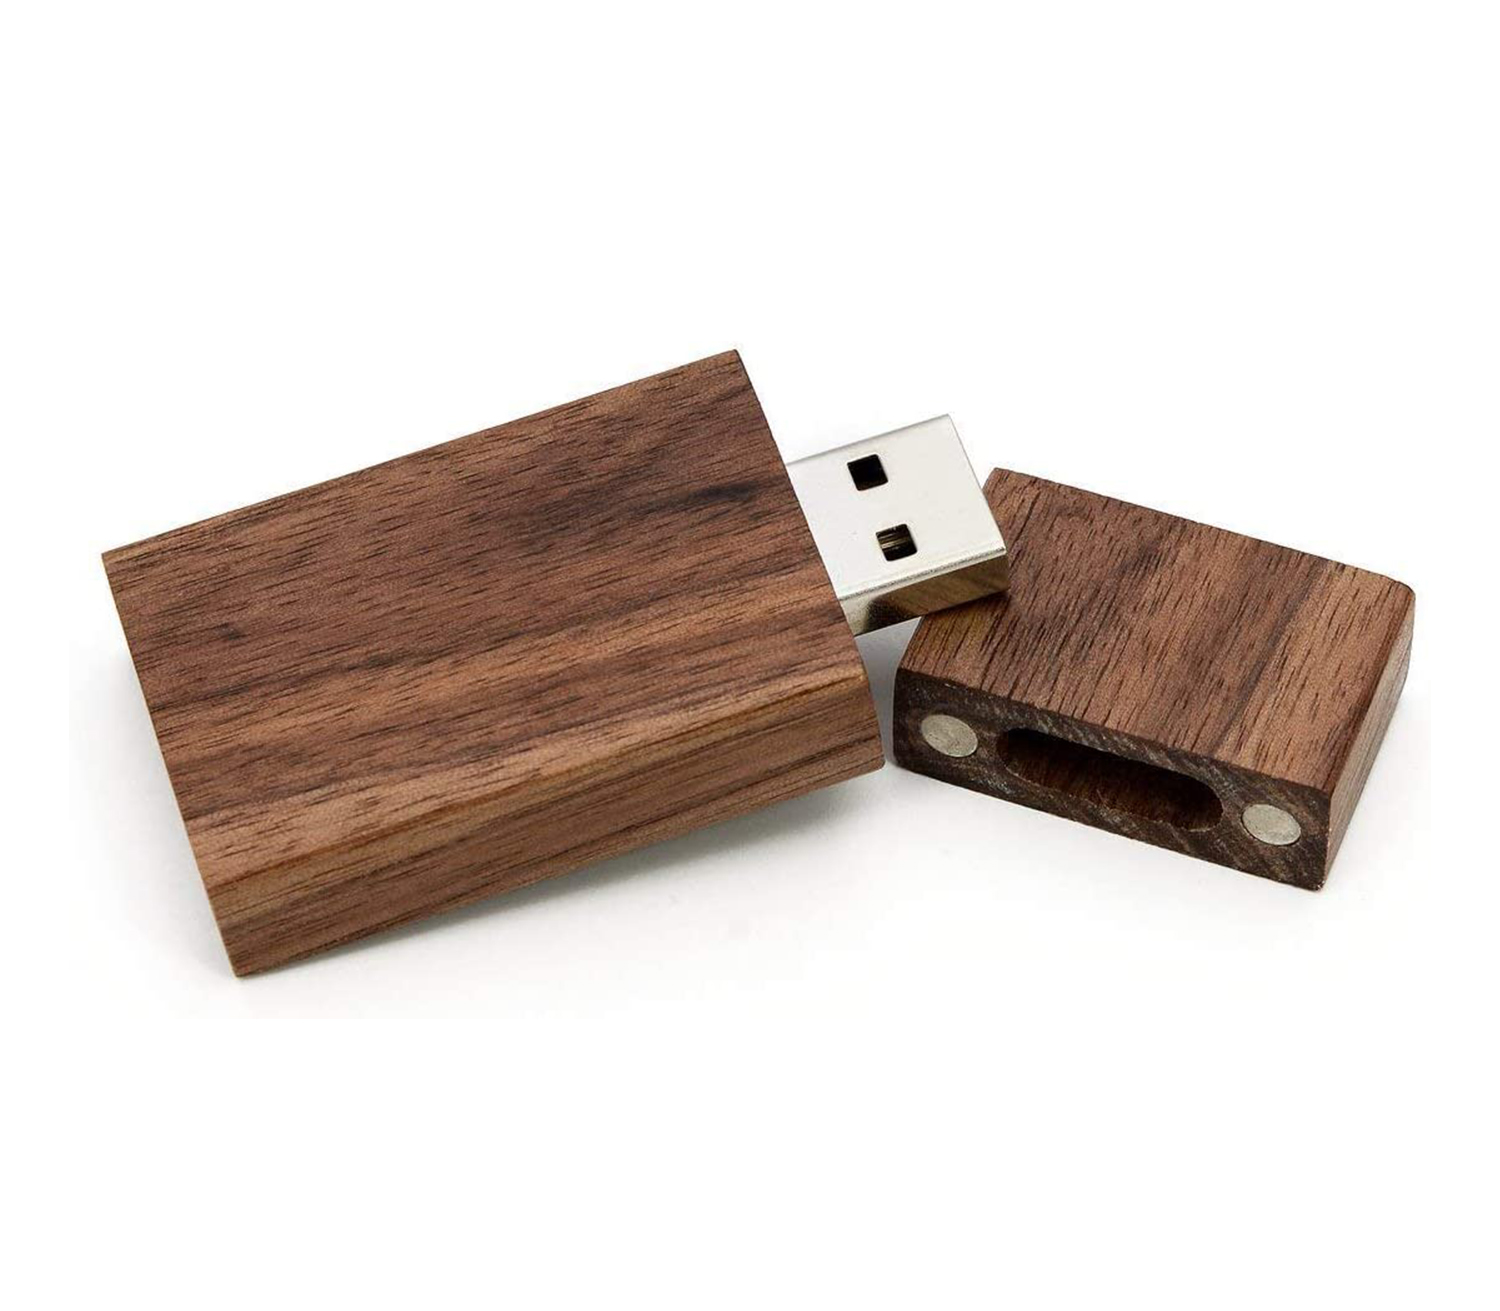 High speed Customized Wooden Wood USB 